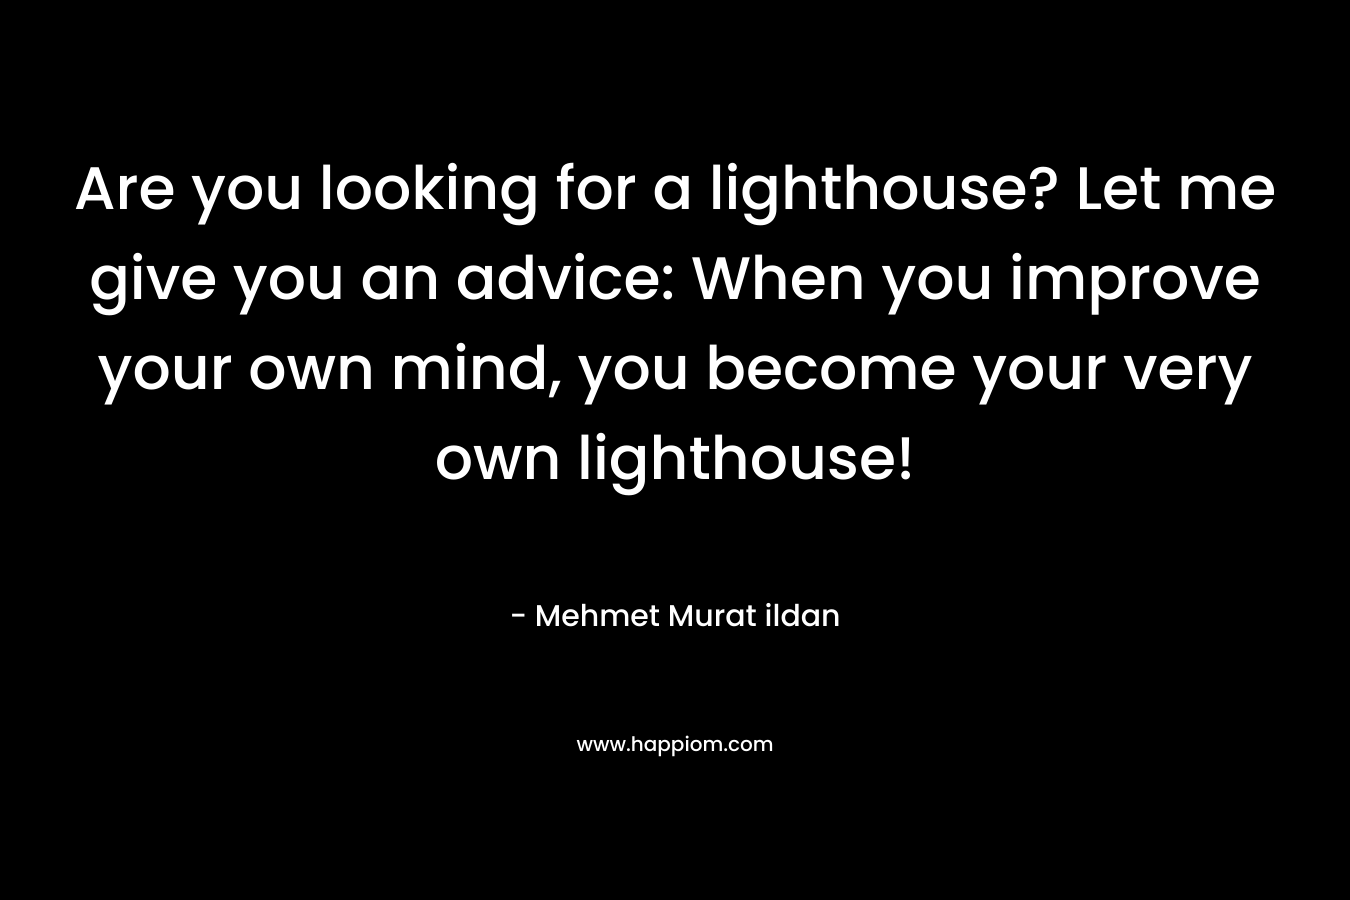 Are you looking for a lighthouse? Let me give you an advice: When you improve your own mind, you become your very own lighthouse! – Mehmet Murat ildan